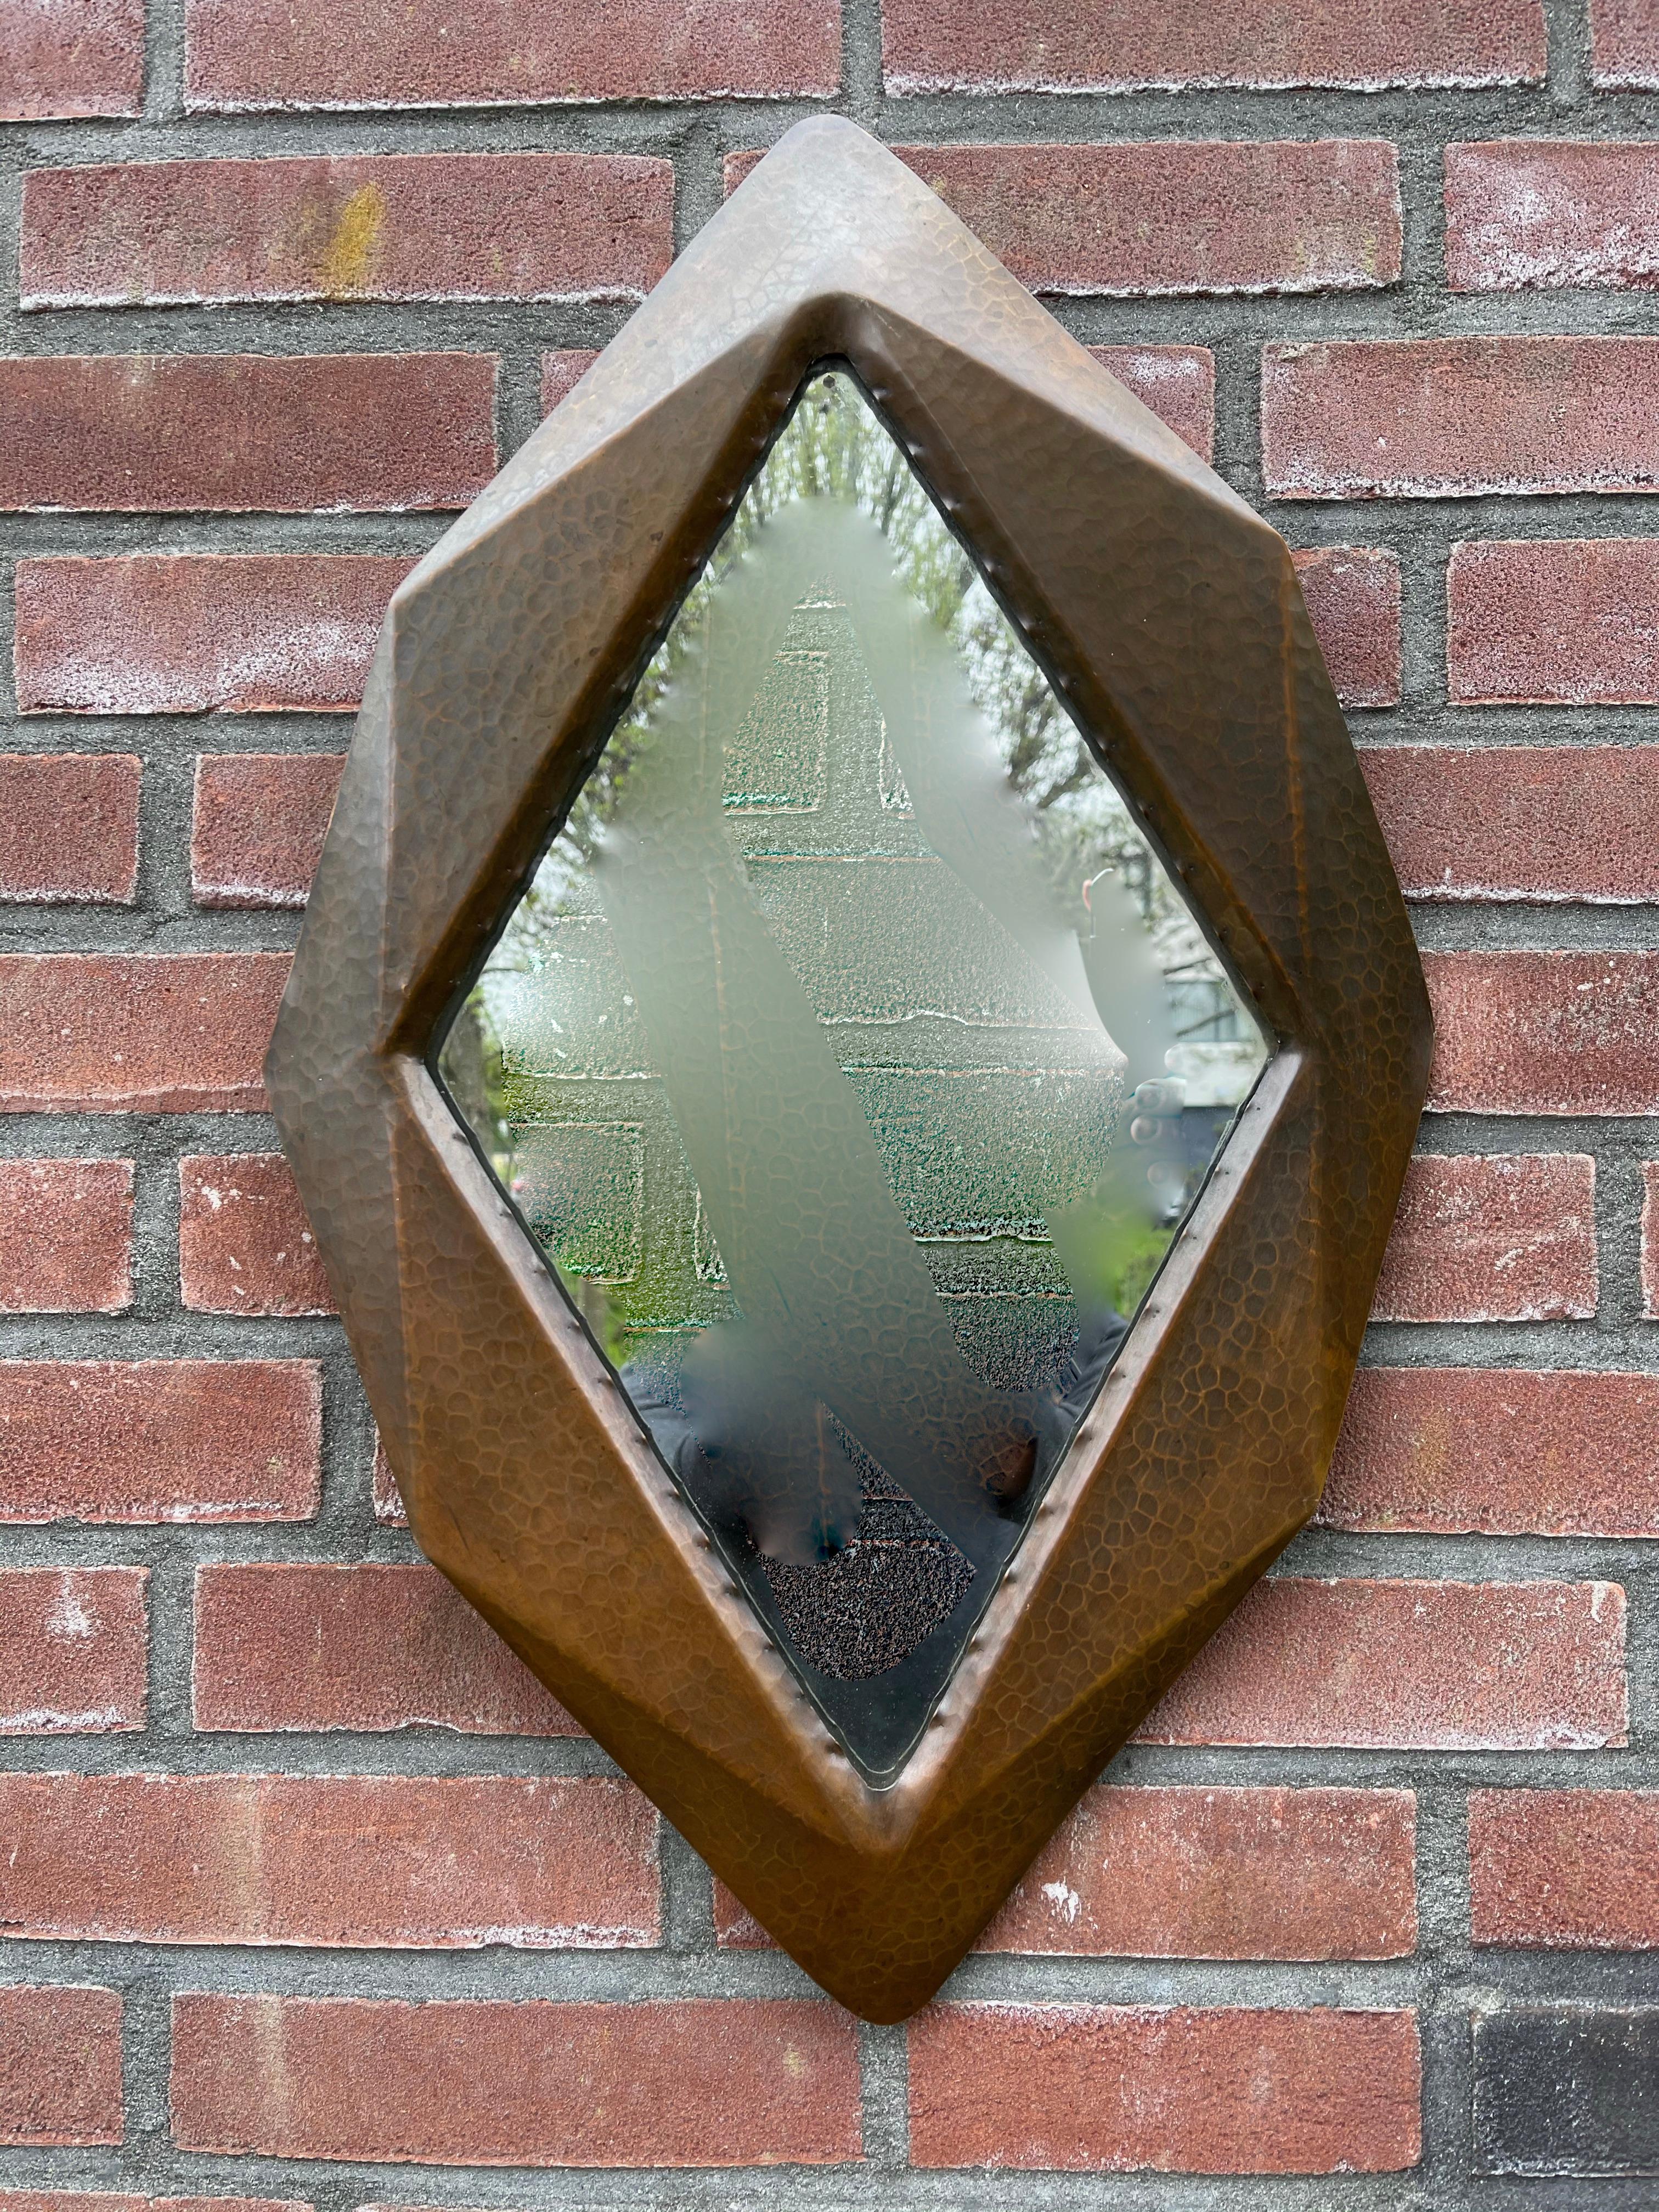 Unique Arts & Crafts Geometric, Cubist Shape, Crafted Copper Hallway Wall Mirror In Excellent Condition For Sale In Lisse, NL